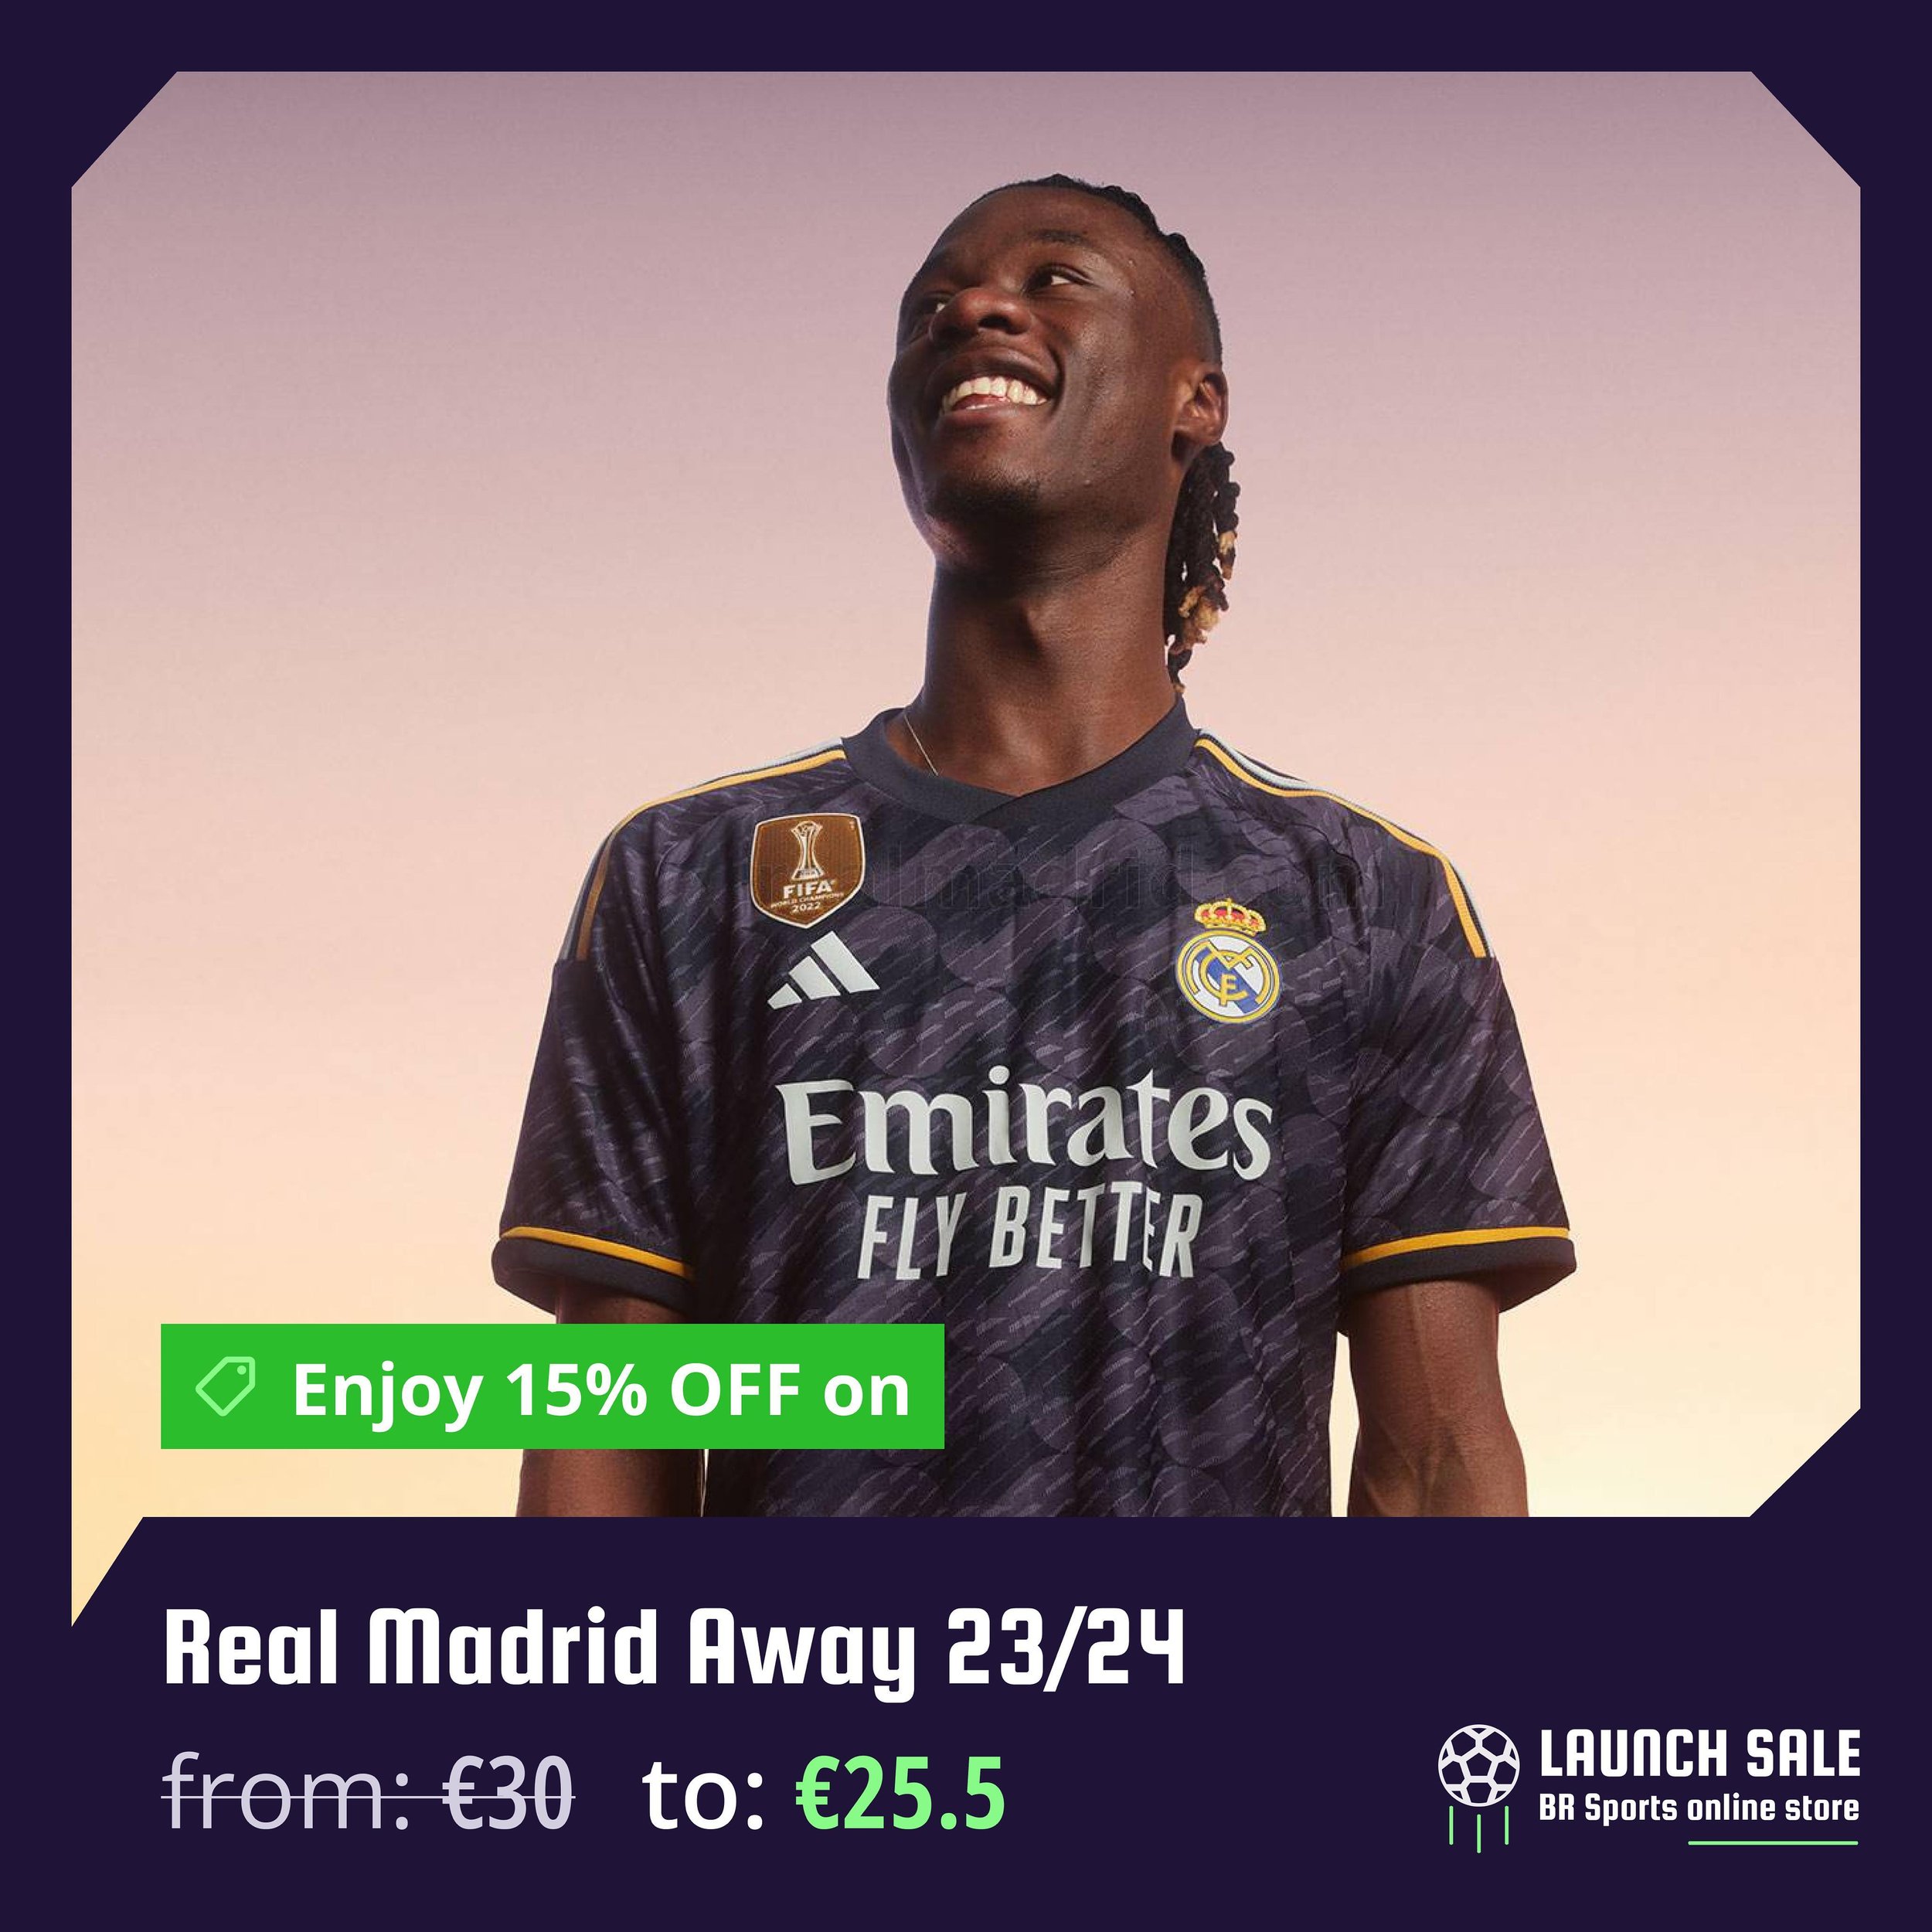 🚀 Launch Sale BR Sports online store 

Enjoy 15% OFF on Real Madrid Away 2023/24 jersey:
from: &euro;30 - to: &euro;25.5

✍️ Customization: &euro;10
📦 Delivery: &euro;6.9

Click the link in the bio and wear your football love!

*This promotion ends